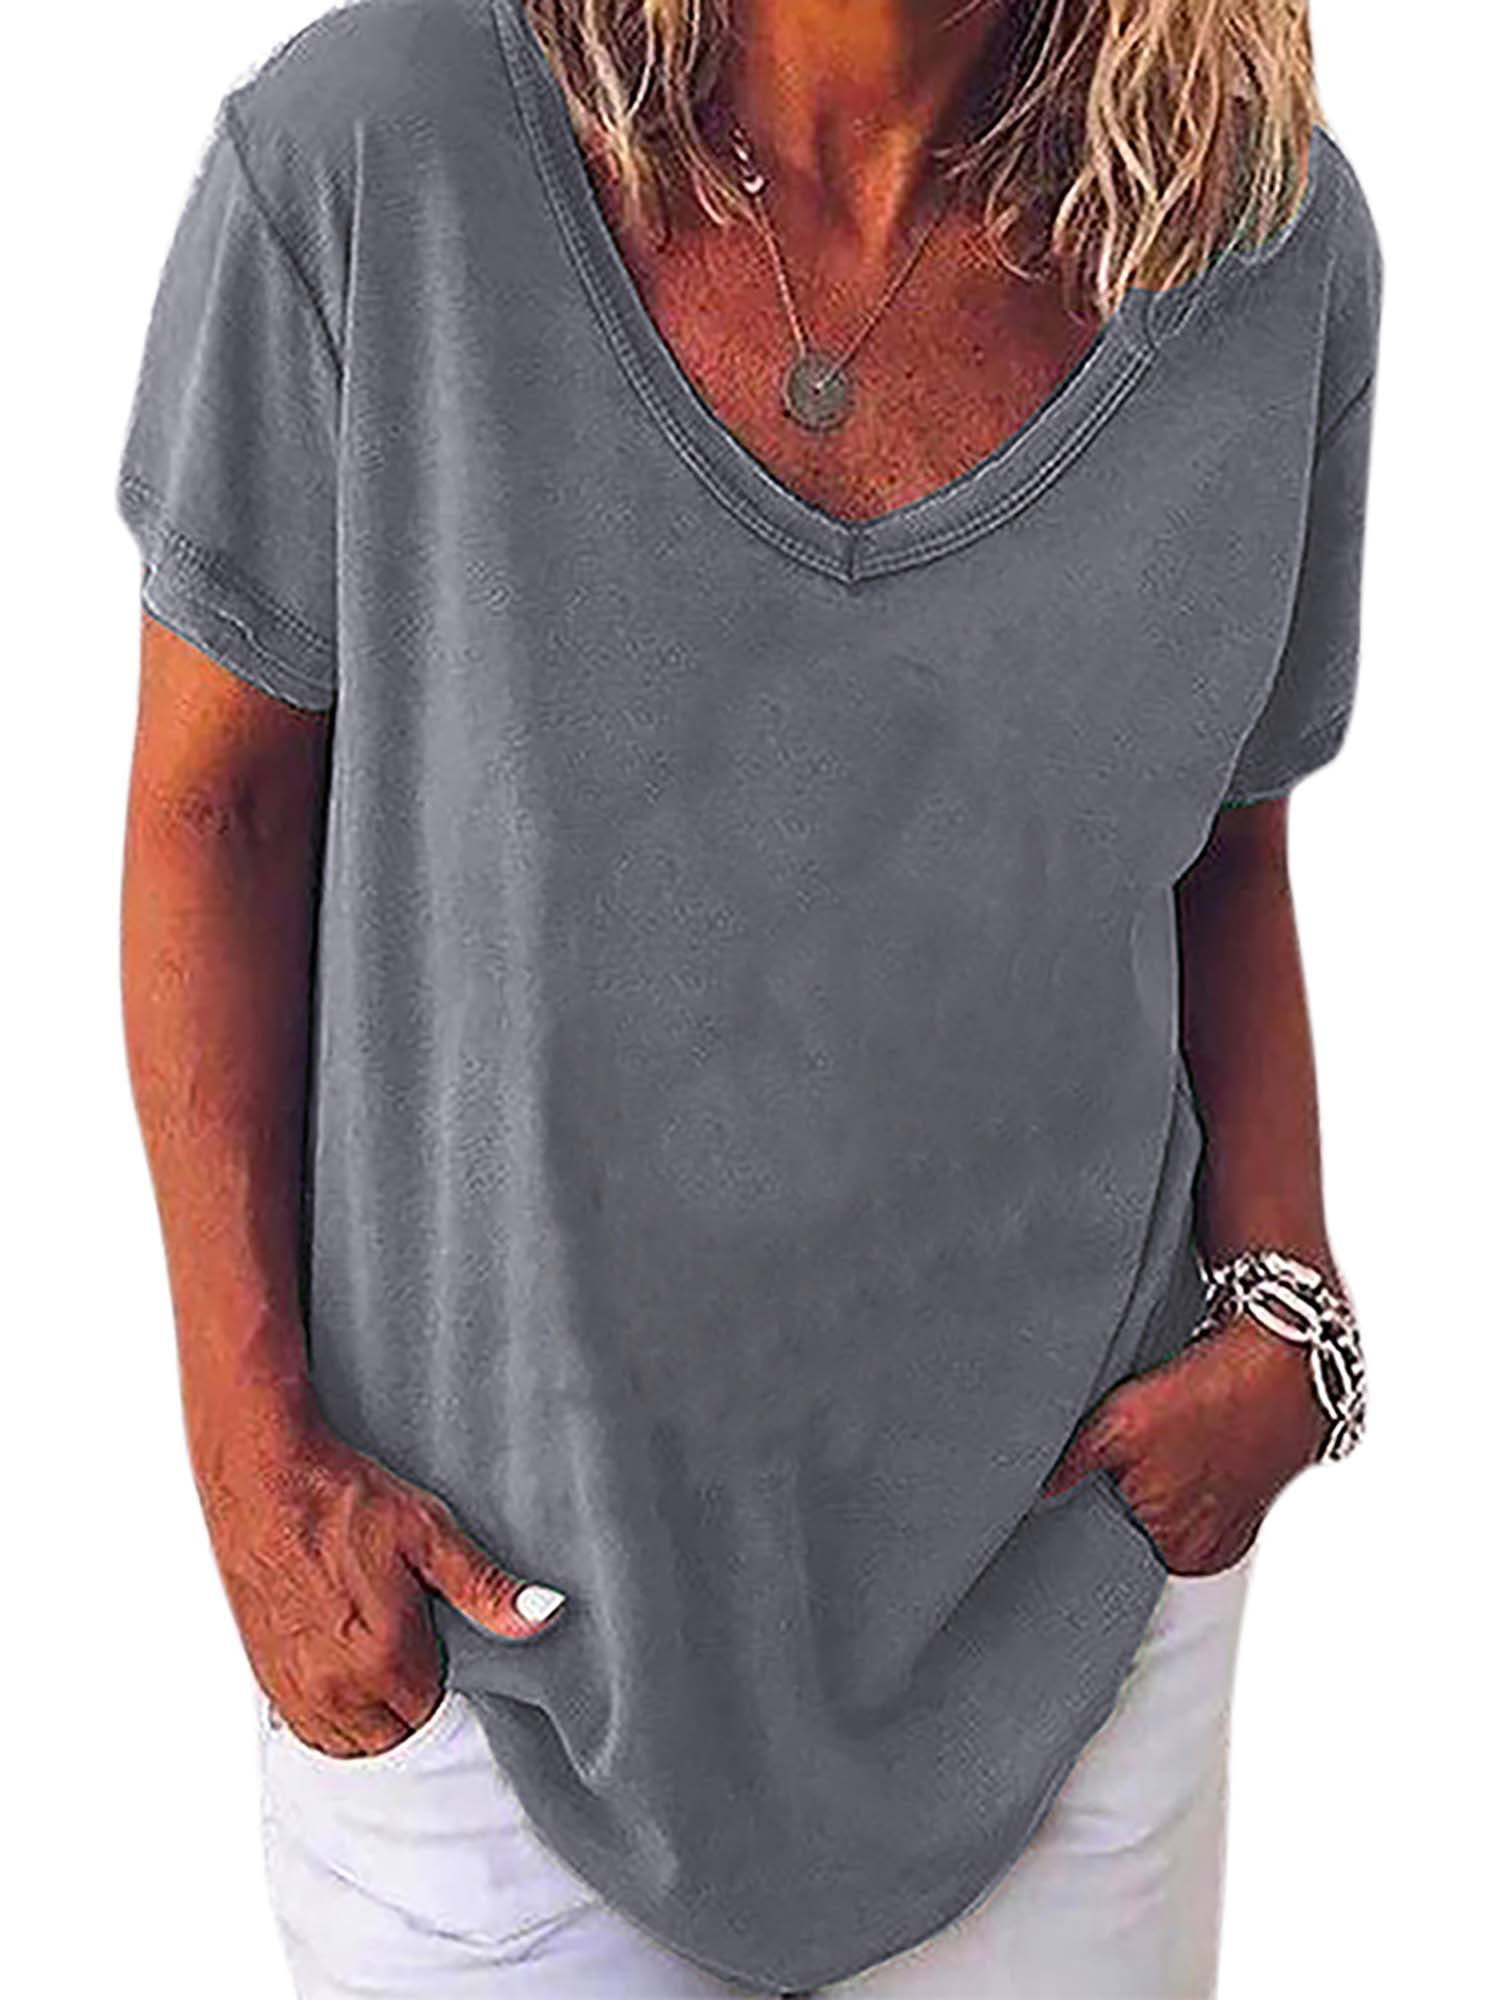 Plus Size Women's V Neck Short Sleeve Blouse Casual Baggy T-Shirt Tunic Tops Tee 